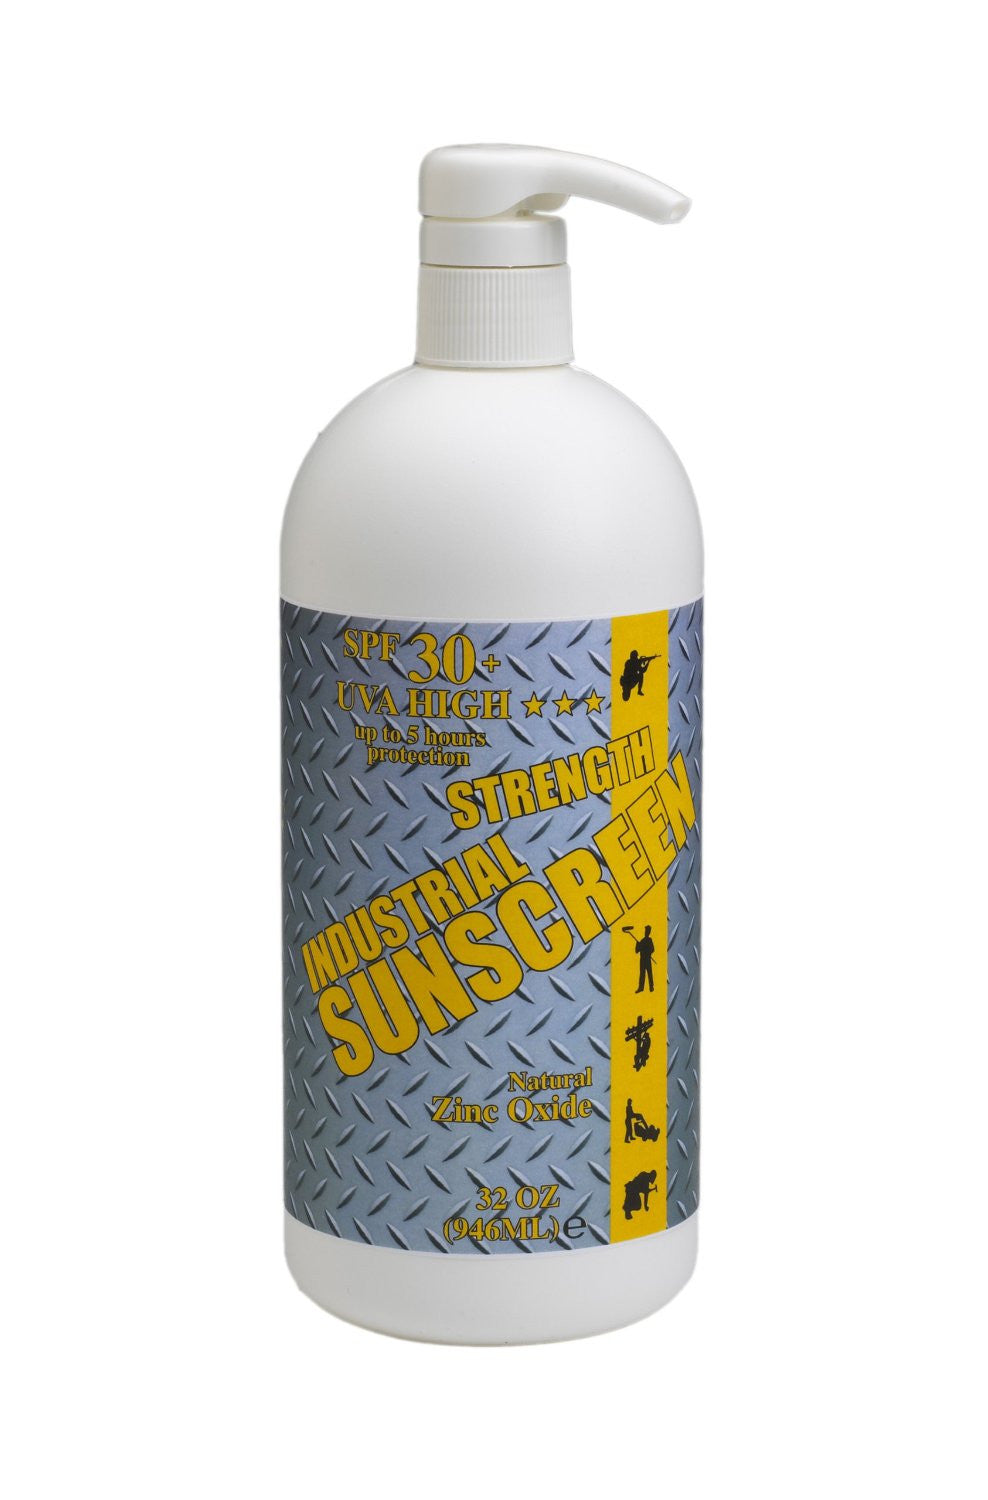 Industrial Strength Sunscreen SPF 30+ Micro Refined Clear Zinc Oxide Fragrance Free 32 oz. Bottle-eSafety Supplies, Inc